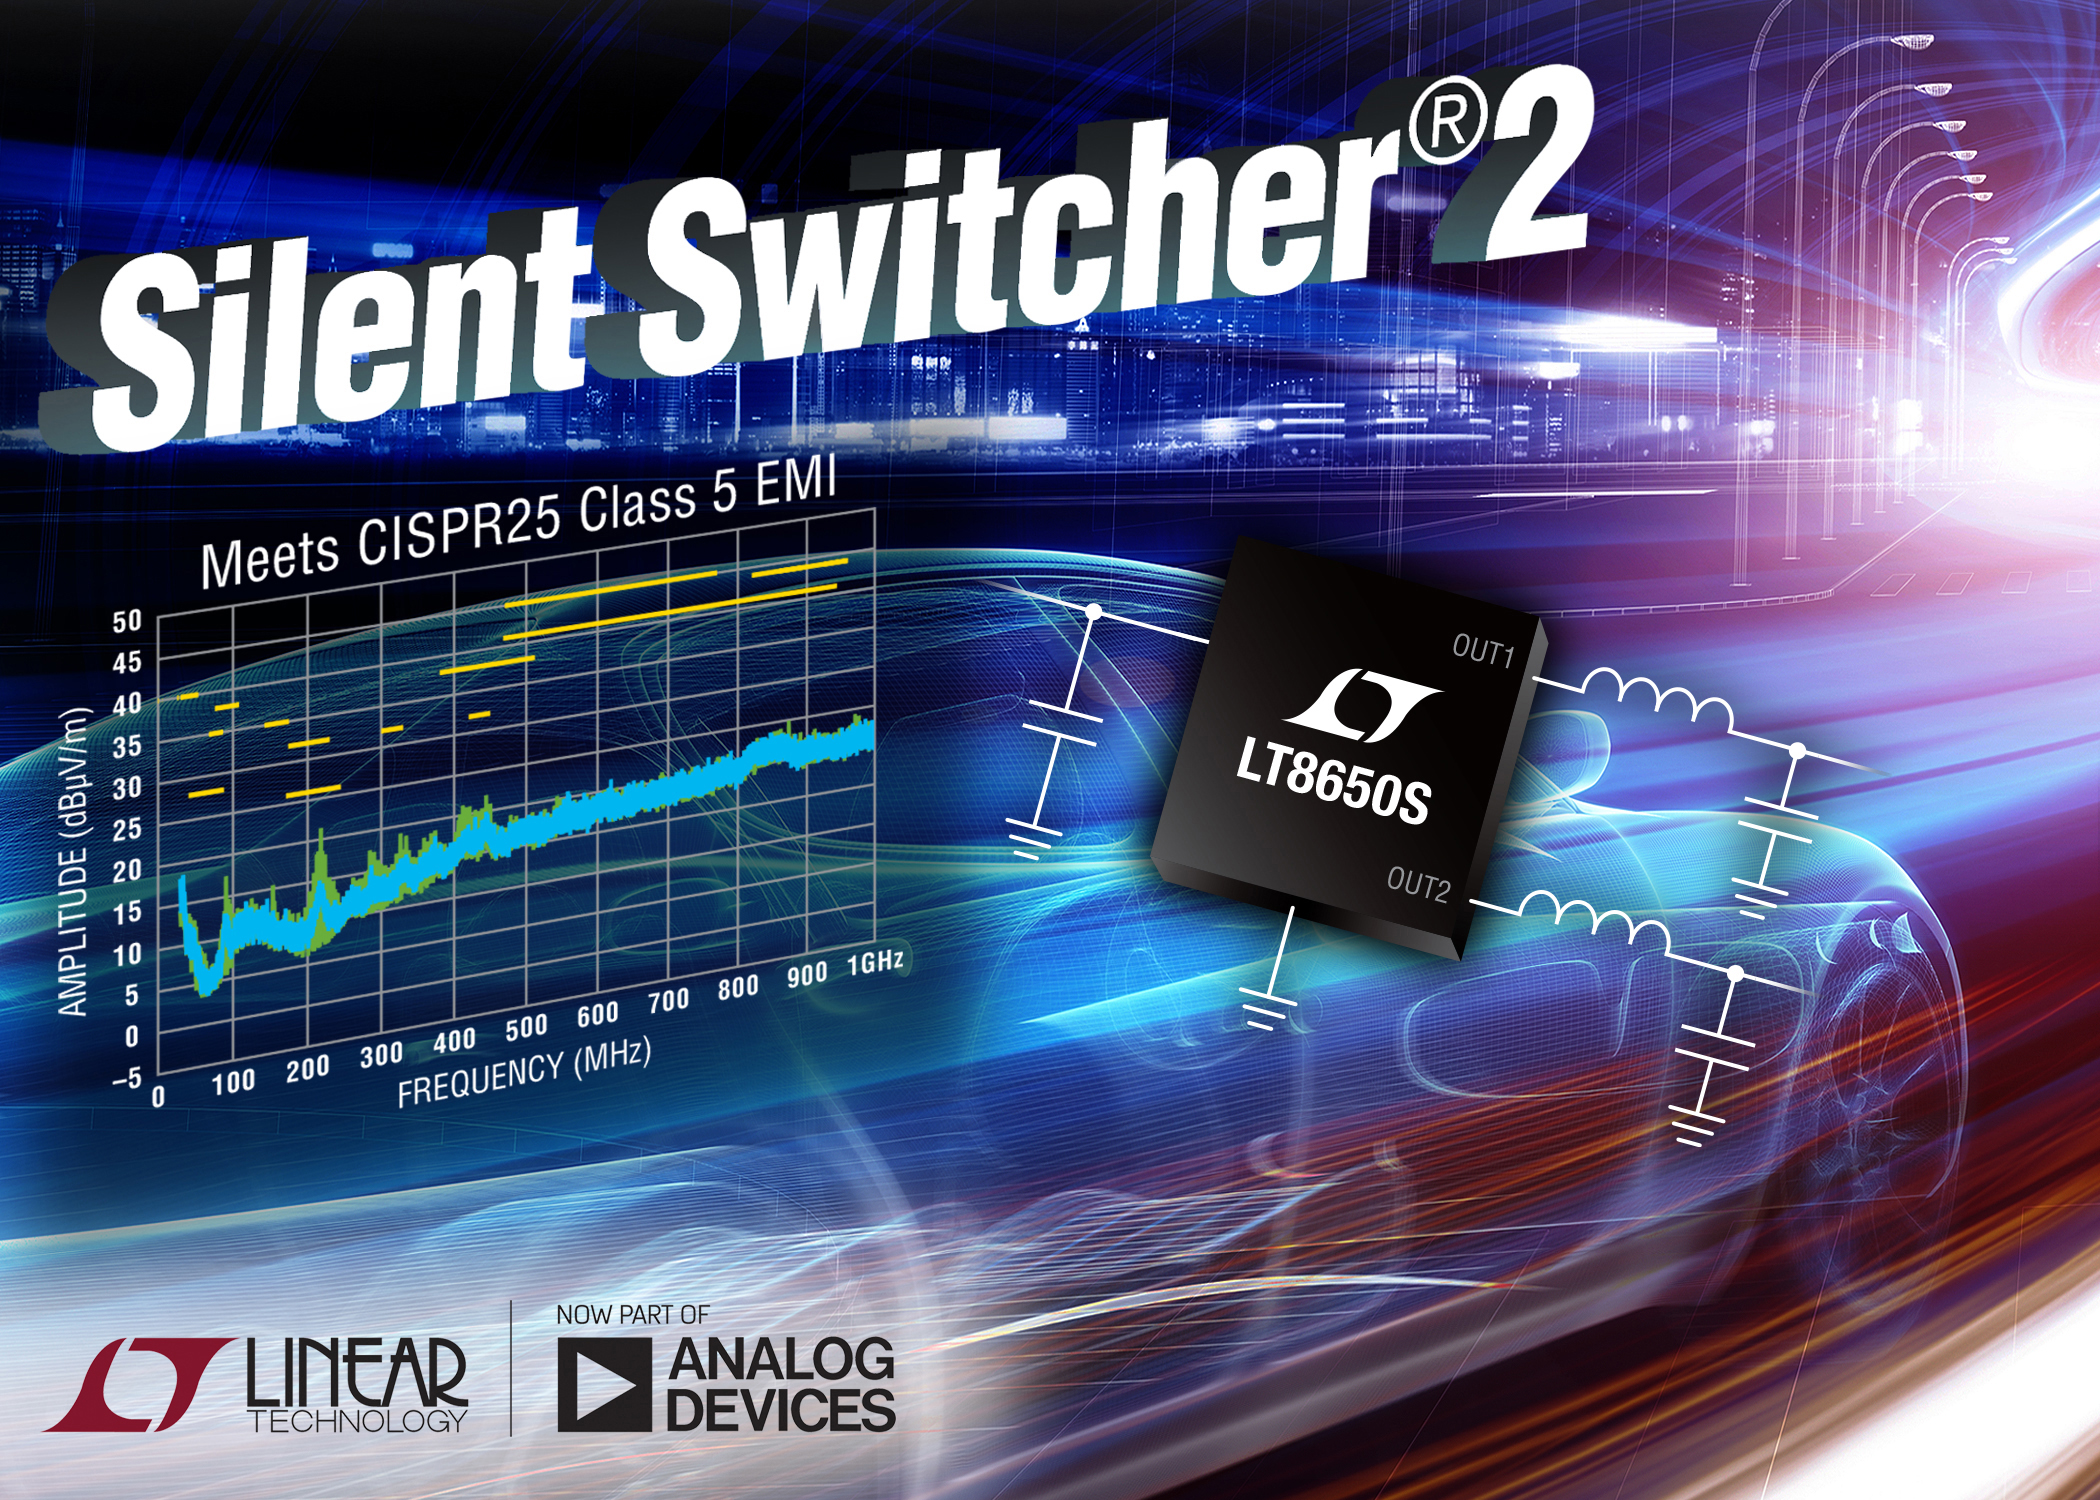 42V, dual 4A (IOUT), synchronous step-down silent switcher 2 delivers 94% efficiency at 2MHz and ultralow EMI emissions